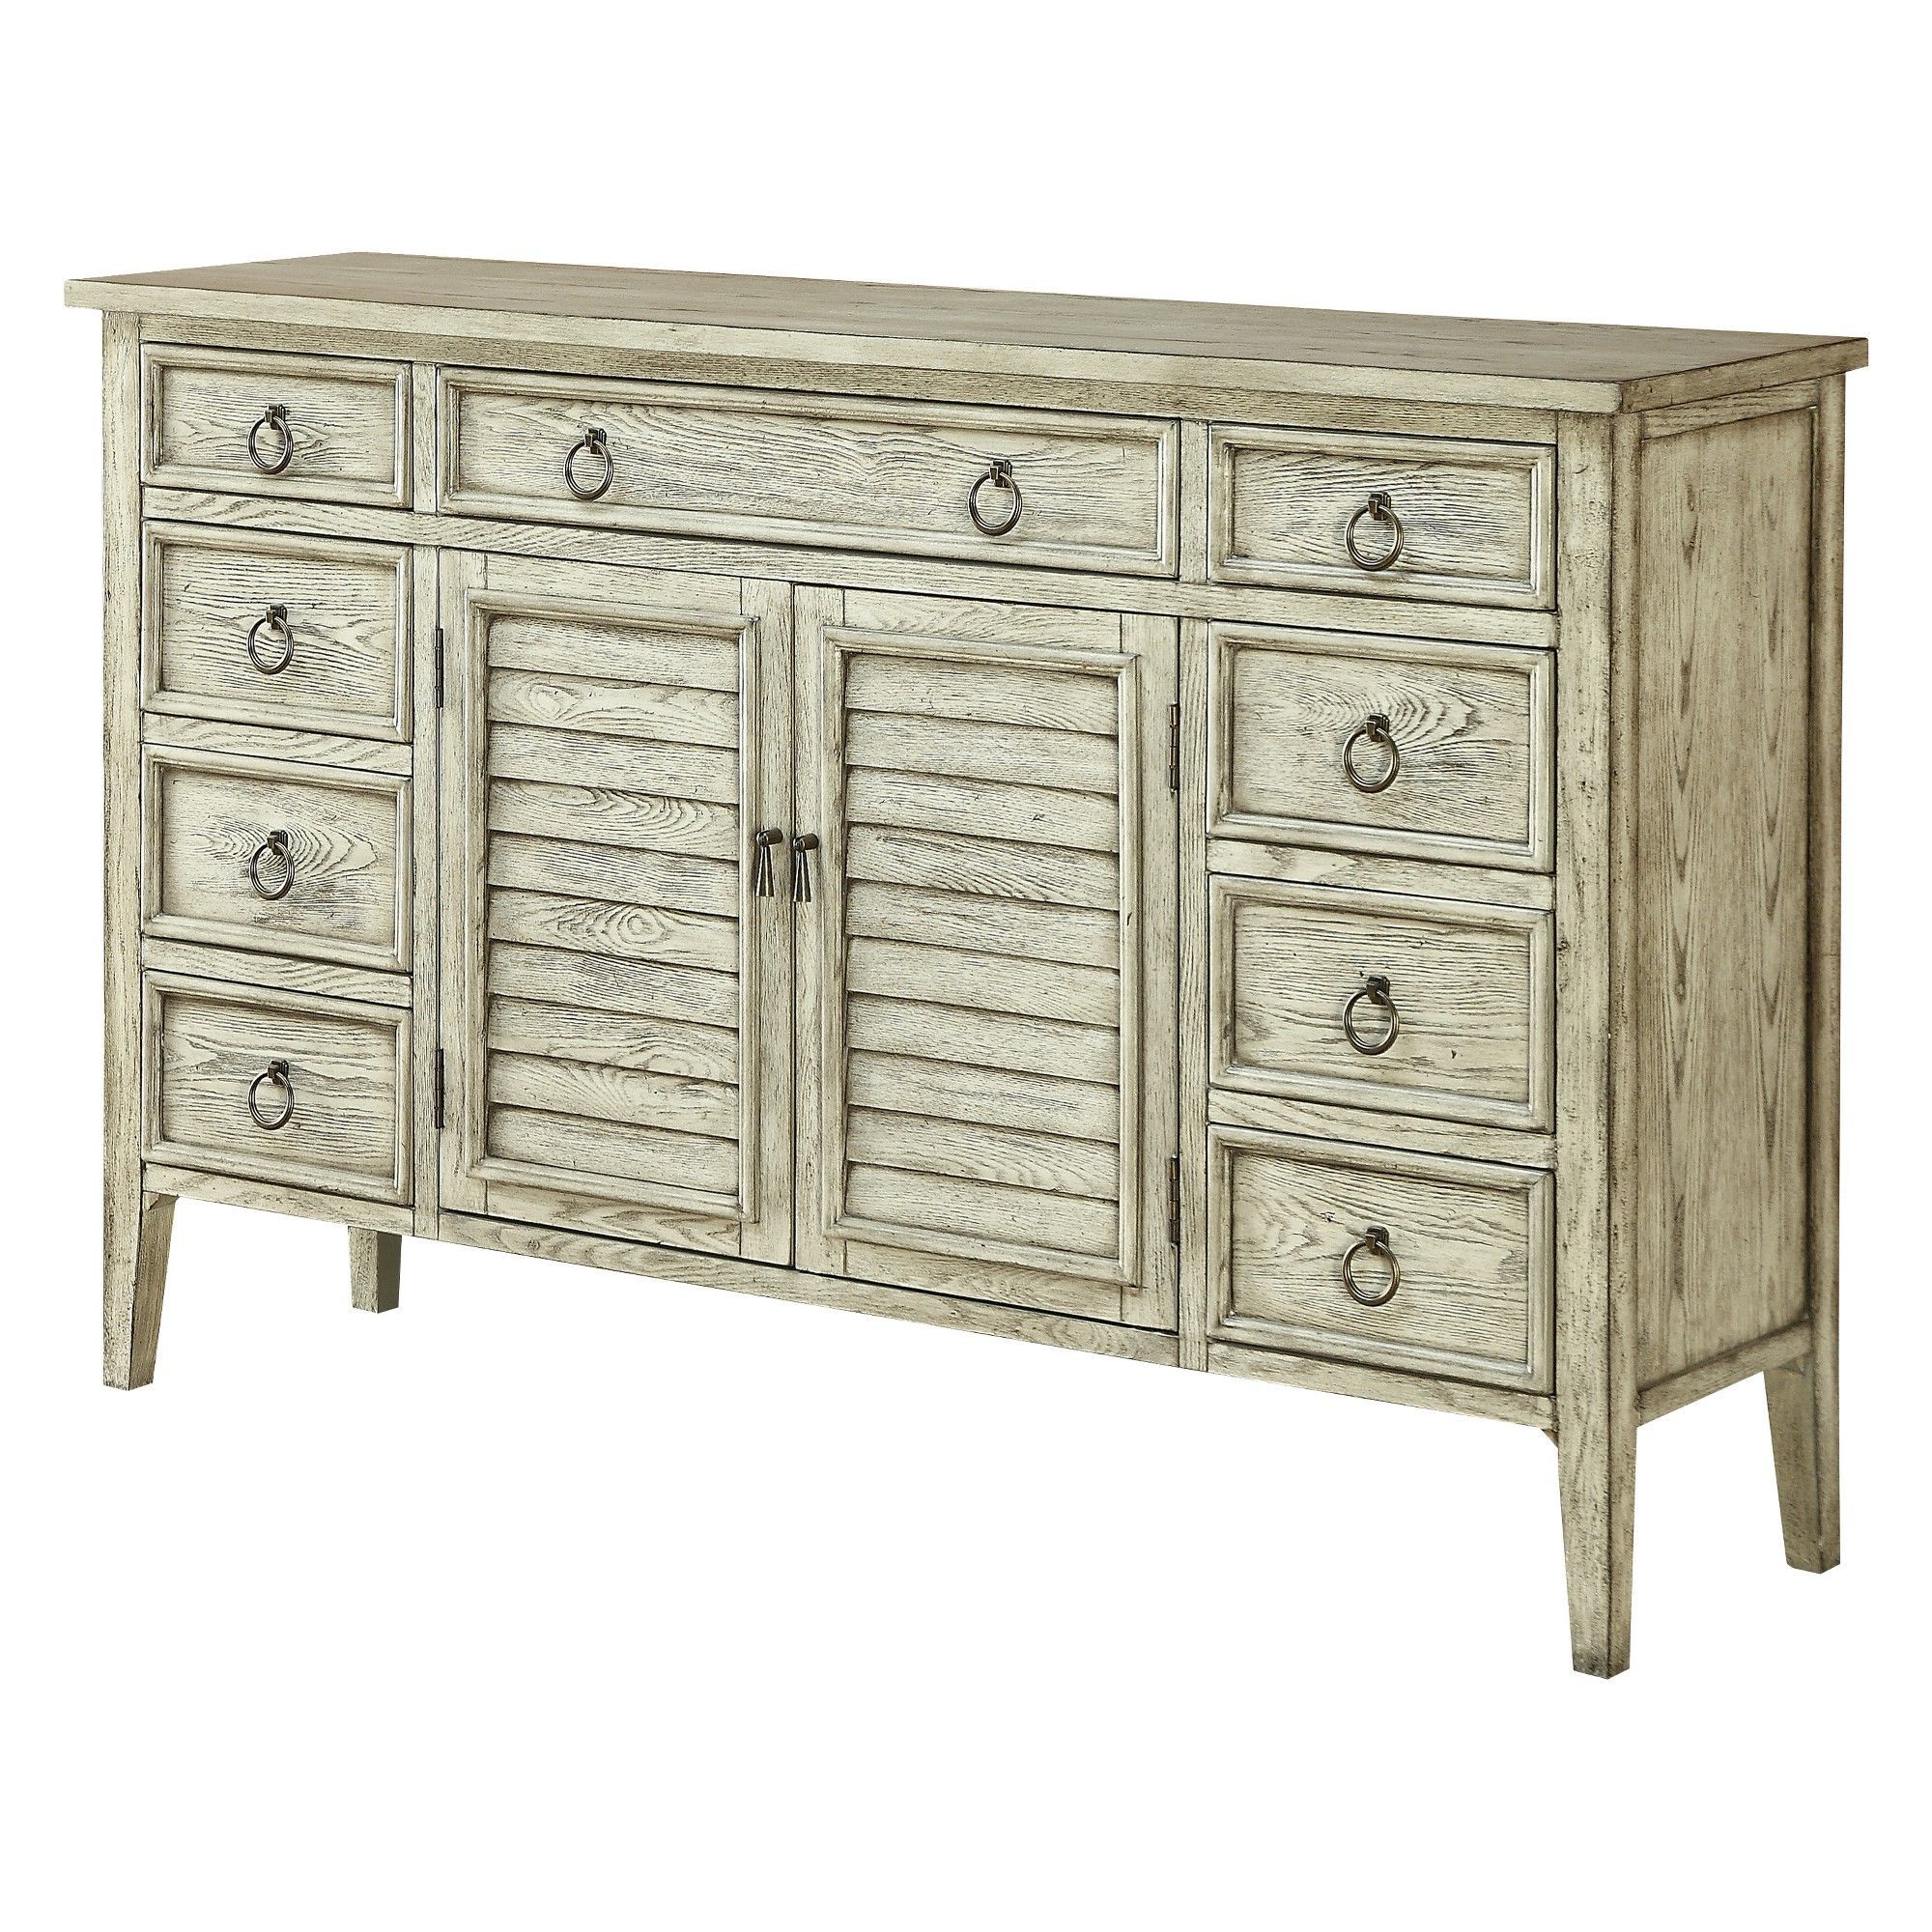 Christopher Knight Home Ivory Coast Credenza Ivory Rub With Etienne Sideboards (View 4 of 20)